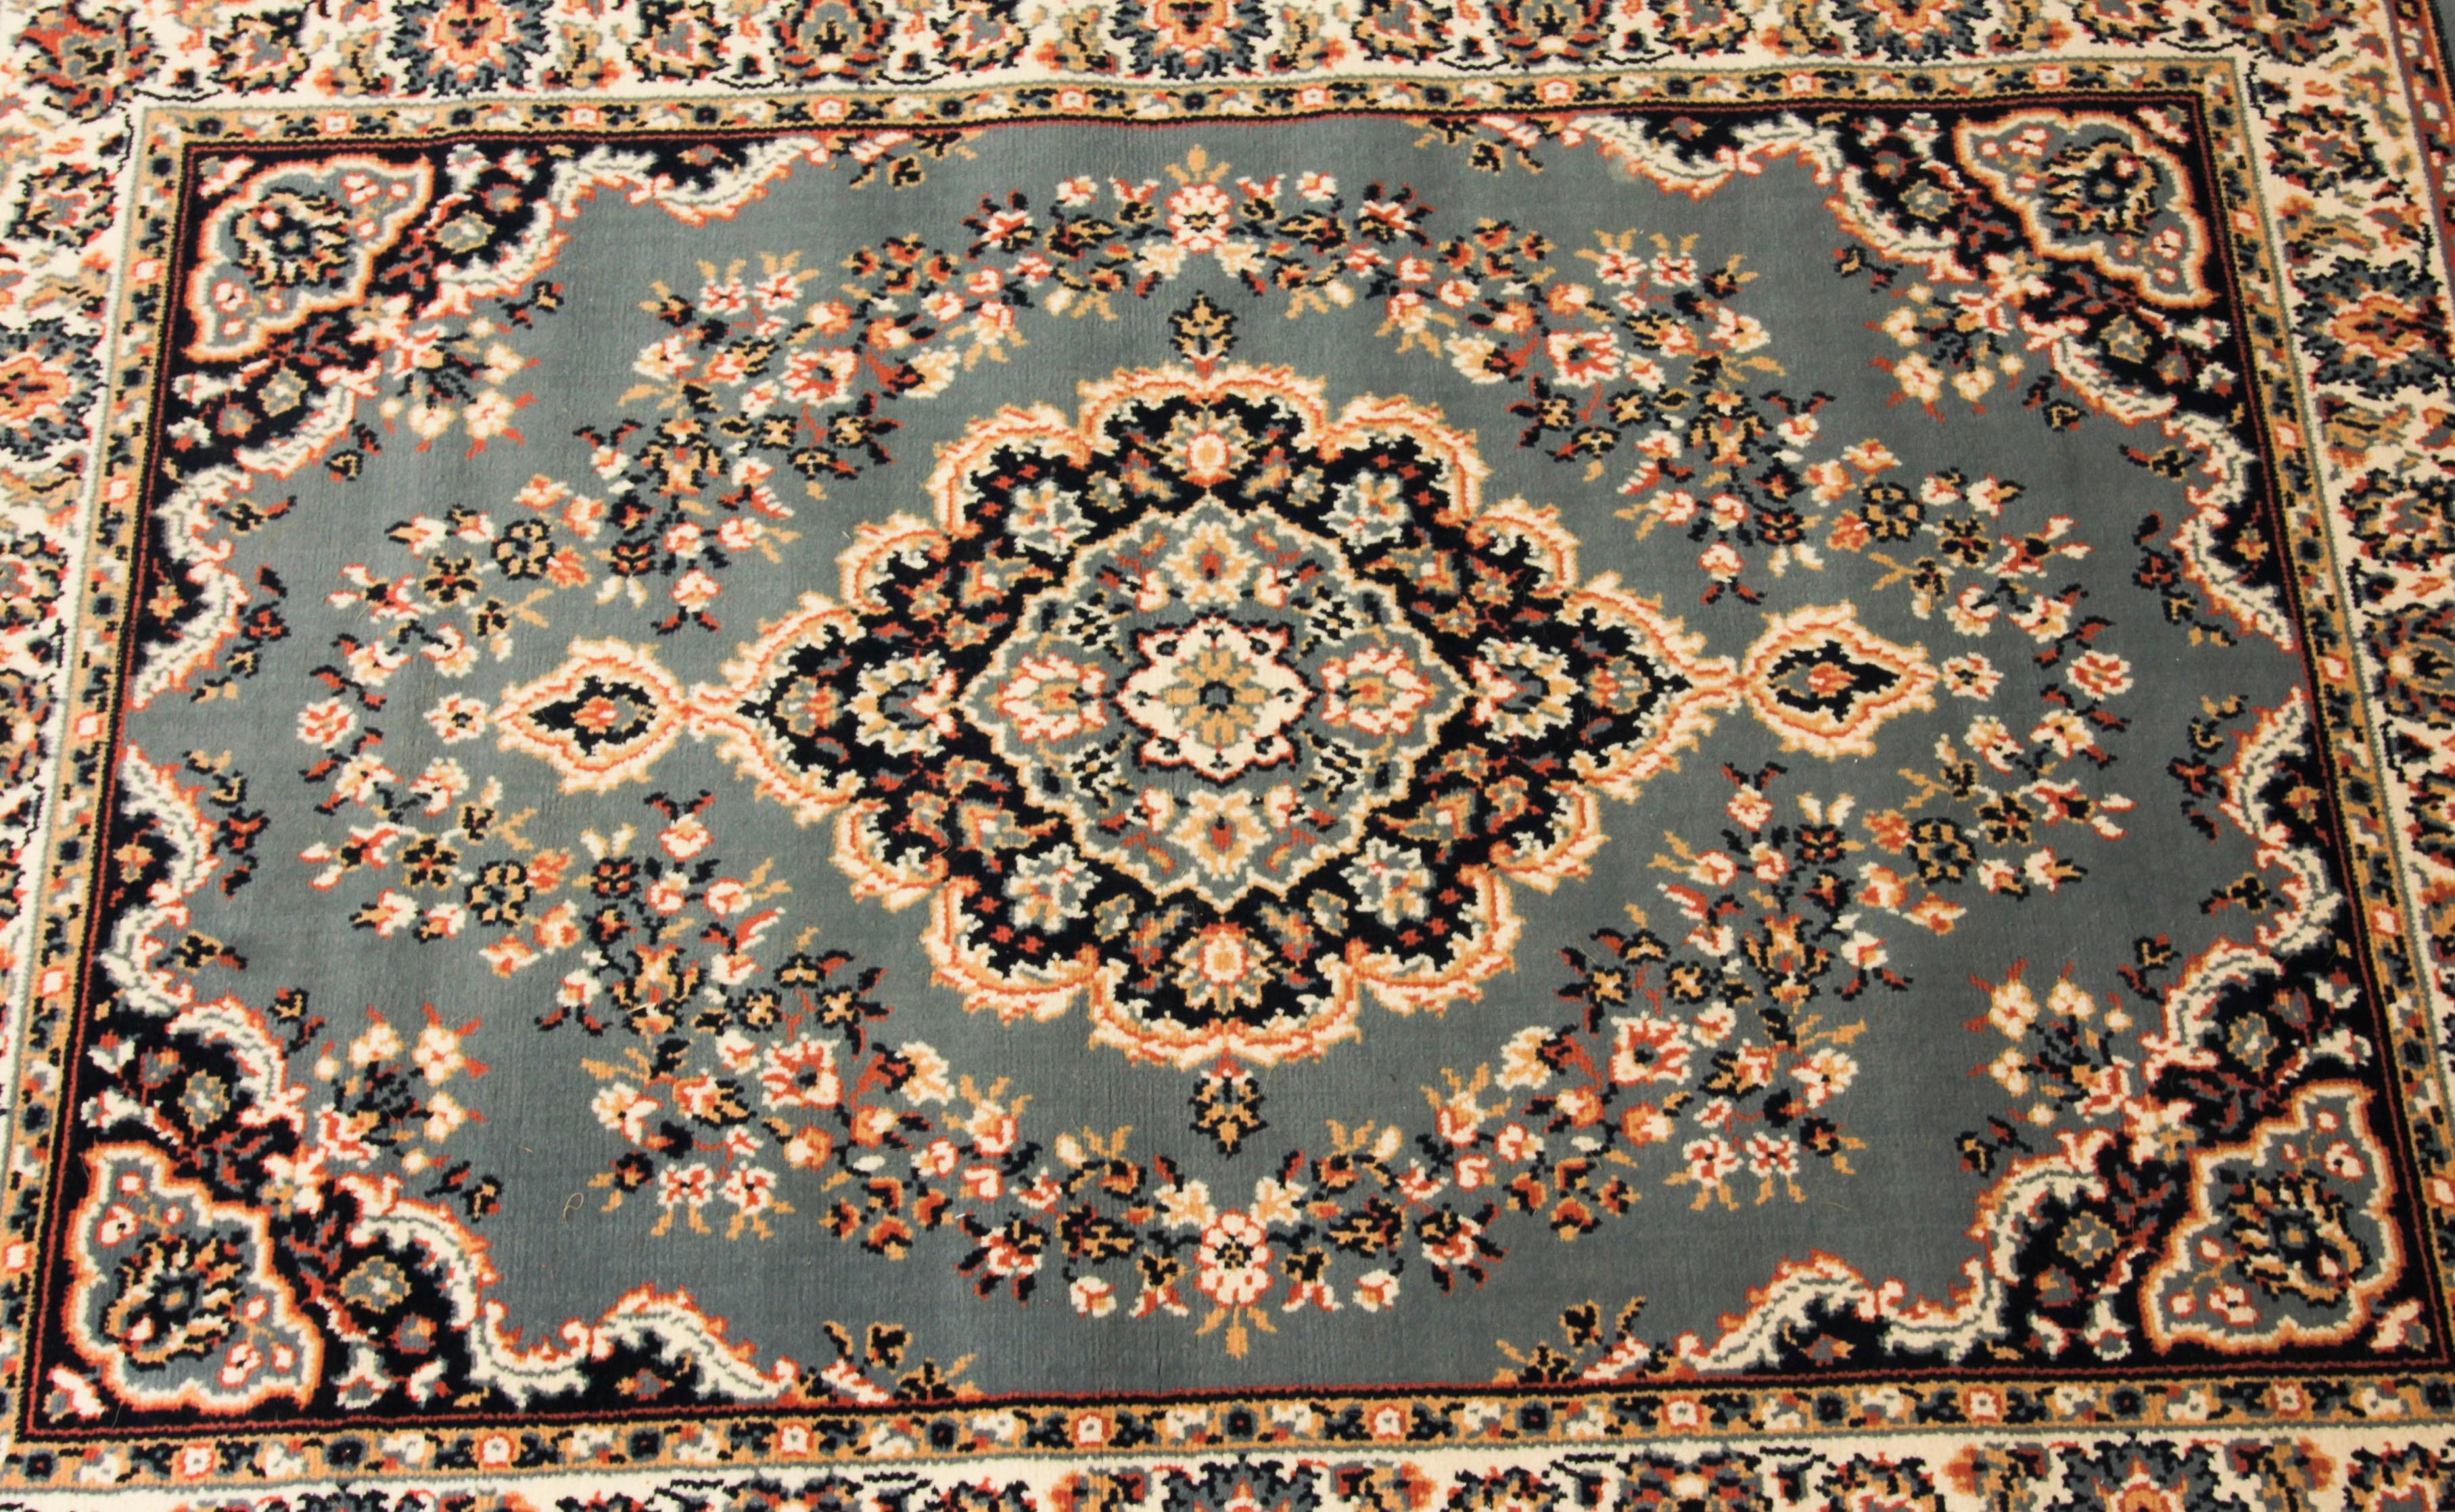 This very elegant fine quality vintage Persian rug was retailed by Mastercraft of Lascashire and dates from the last quarter of the 20th century.
 
This beautiful carpet was machine woven, it features a black and sapphire blue with medallions in